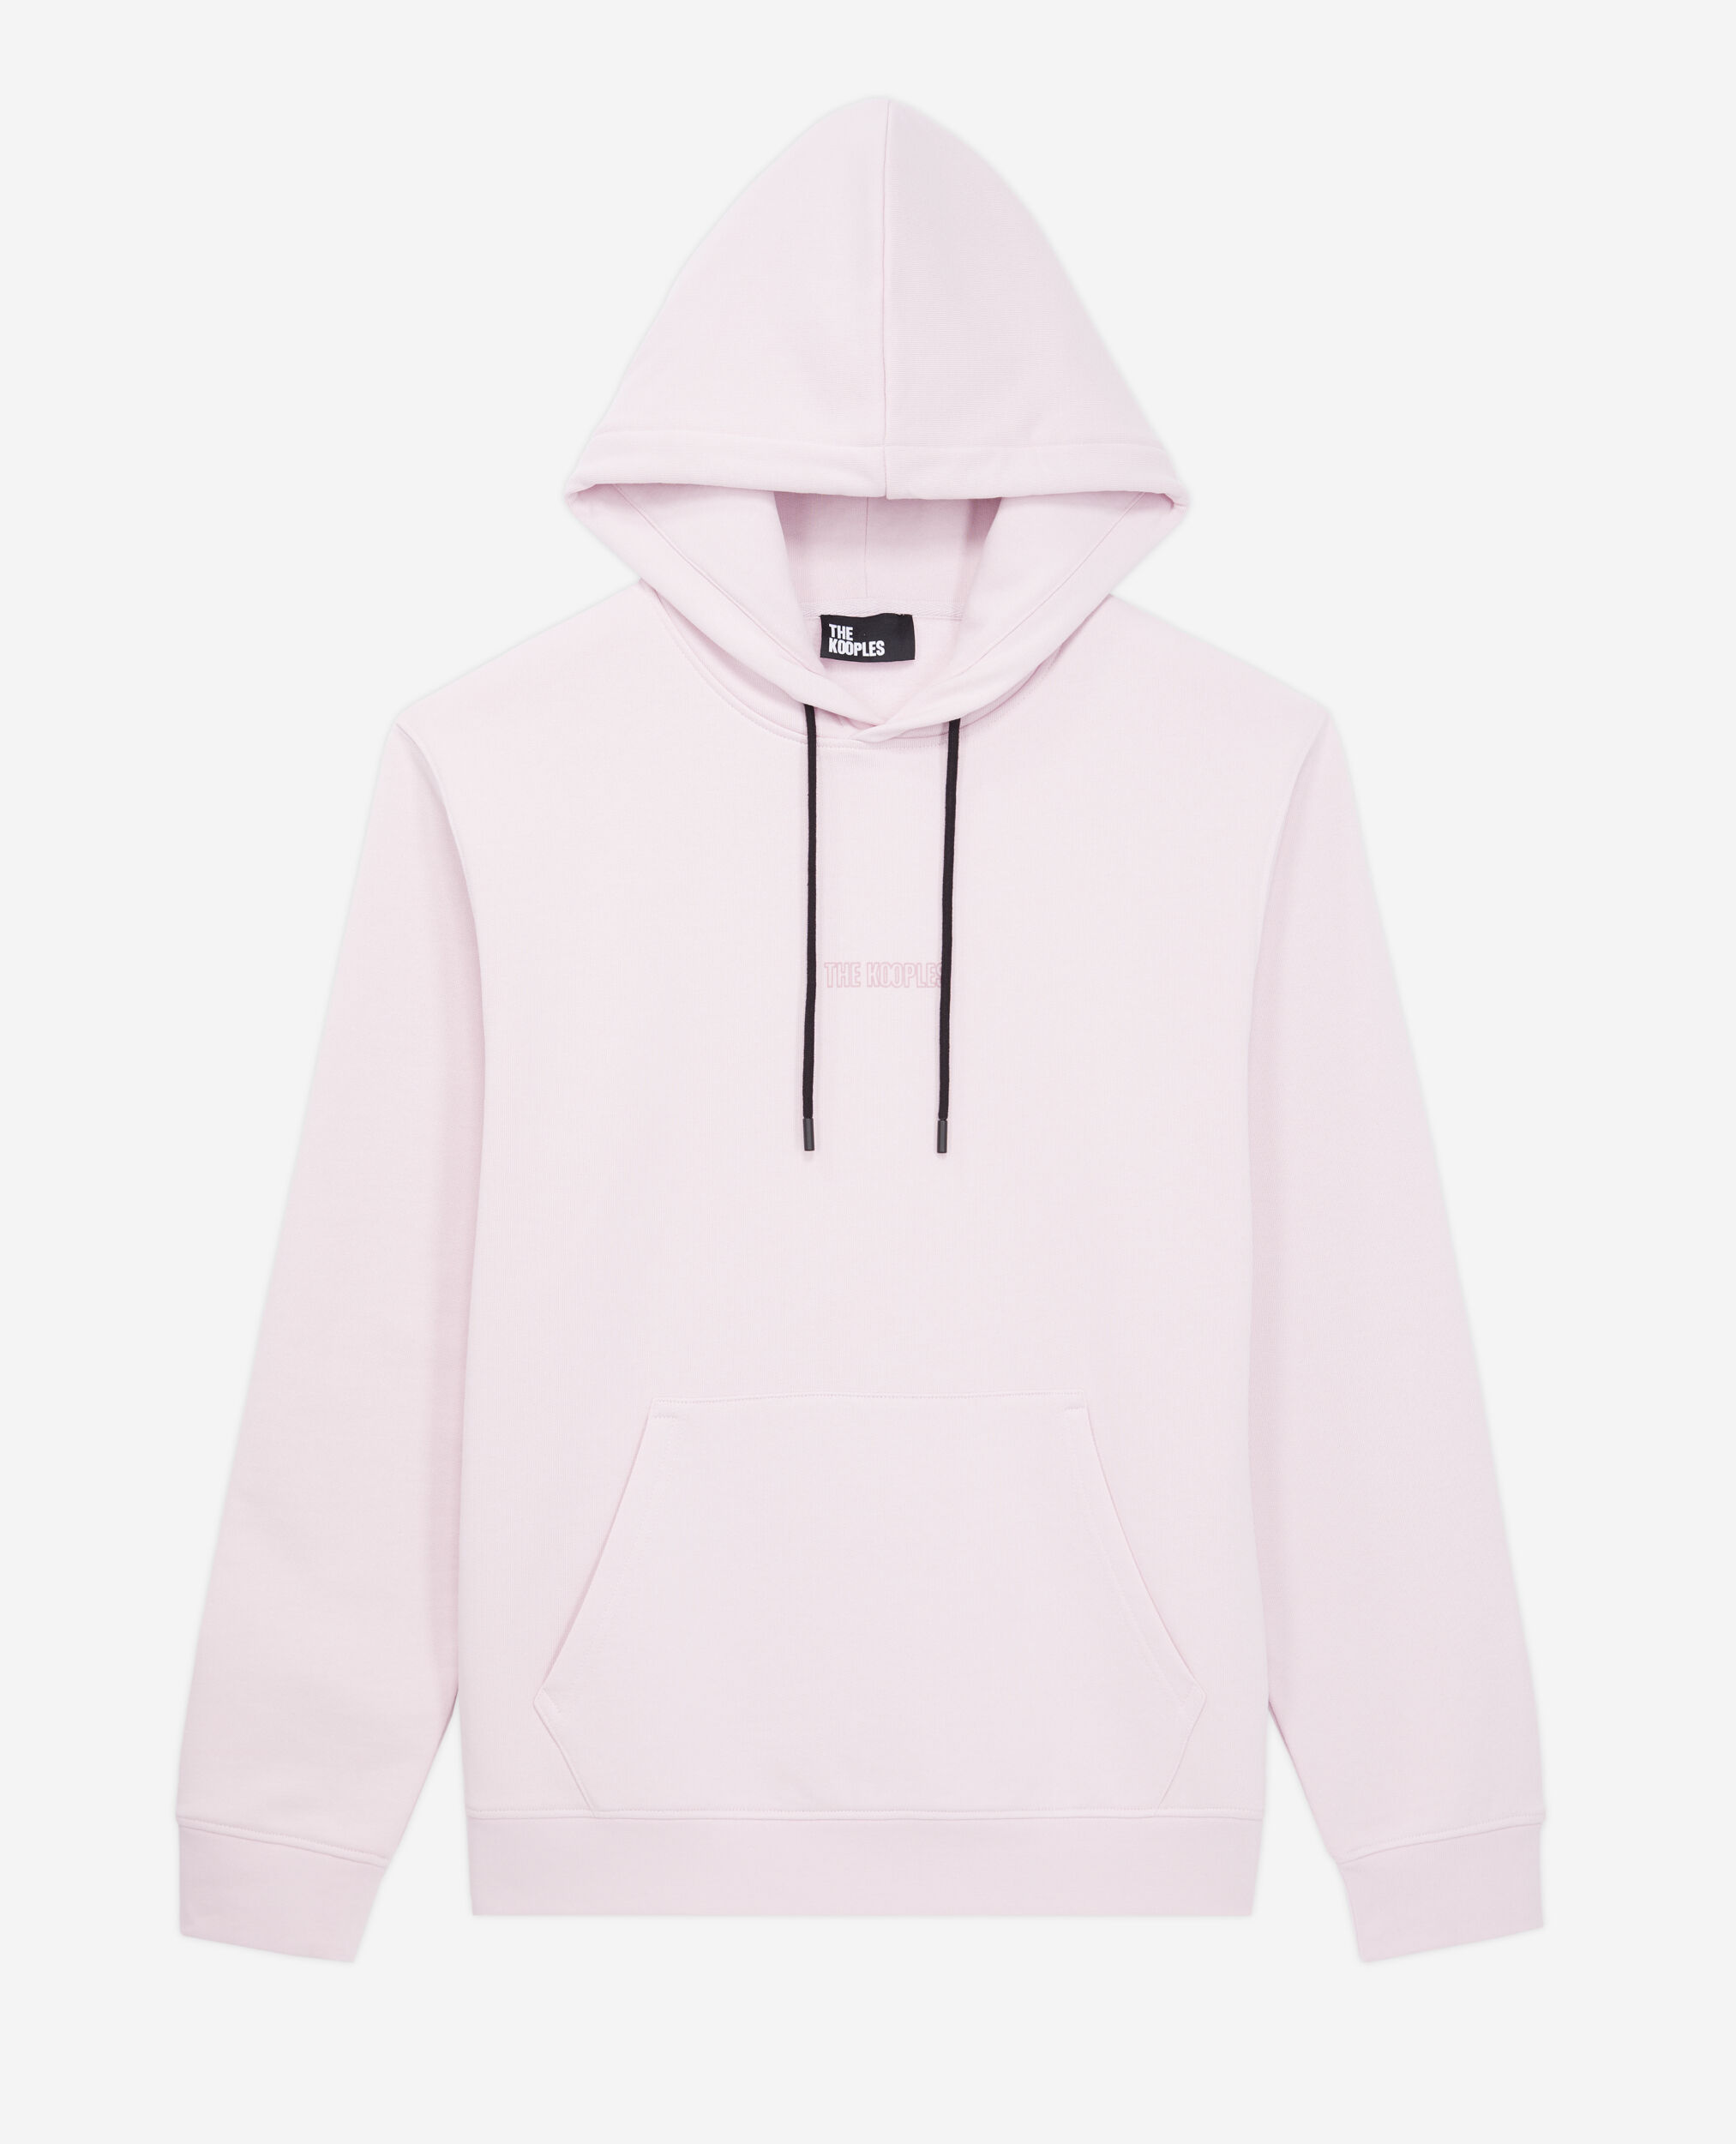 Pink hoodie with logo, season's star piece! Discover of men's ready-to-wear on the website and in store.